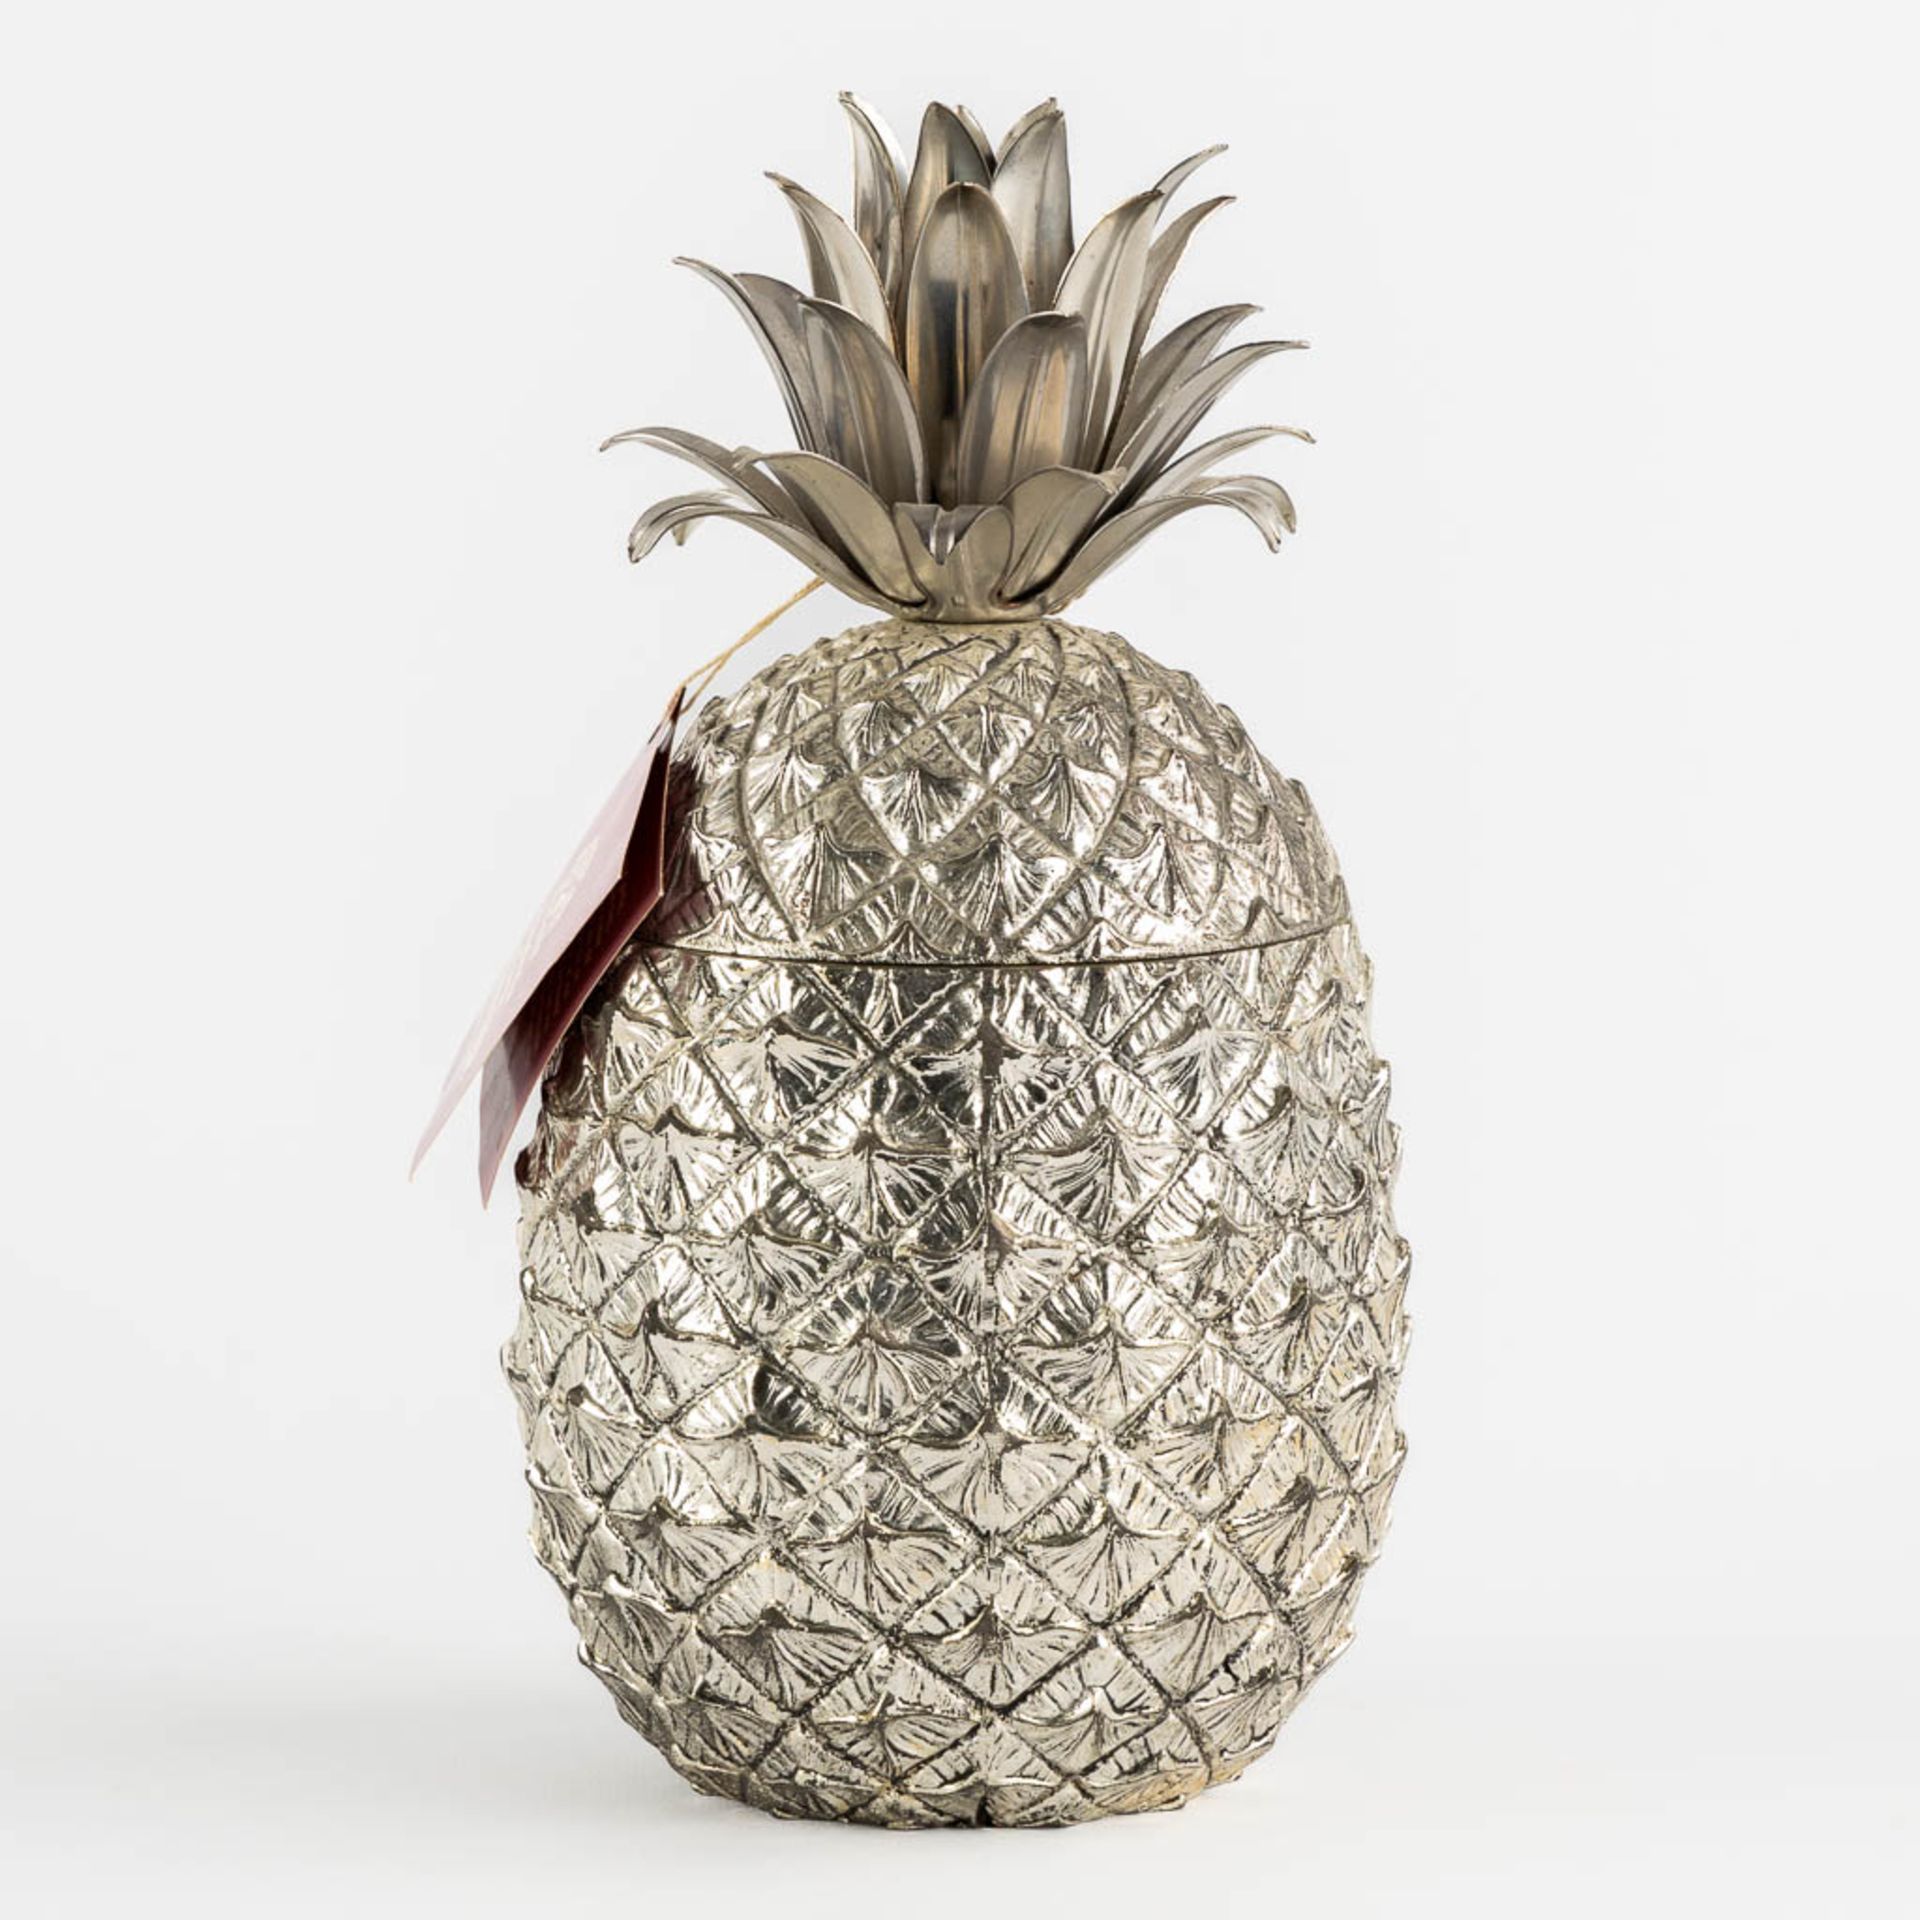 Mauro MANETTI (XX) 'Pineapple' an ice pail. (H:24 x D:13 cm) - Image 5 of 11